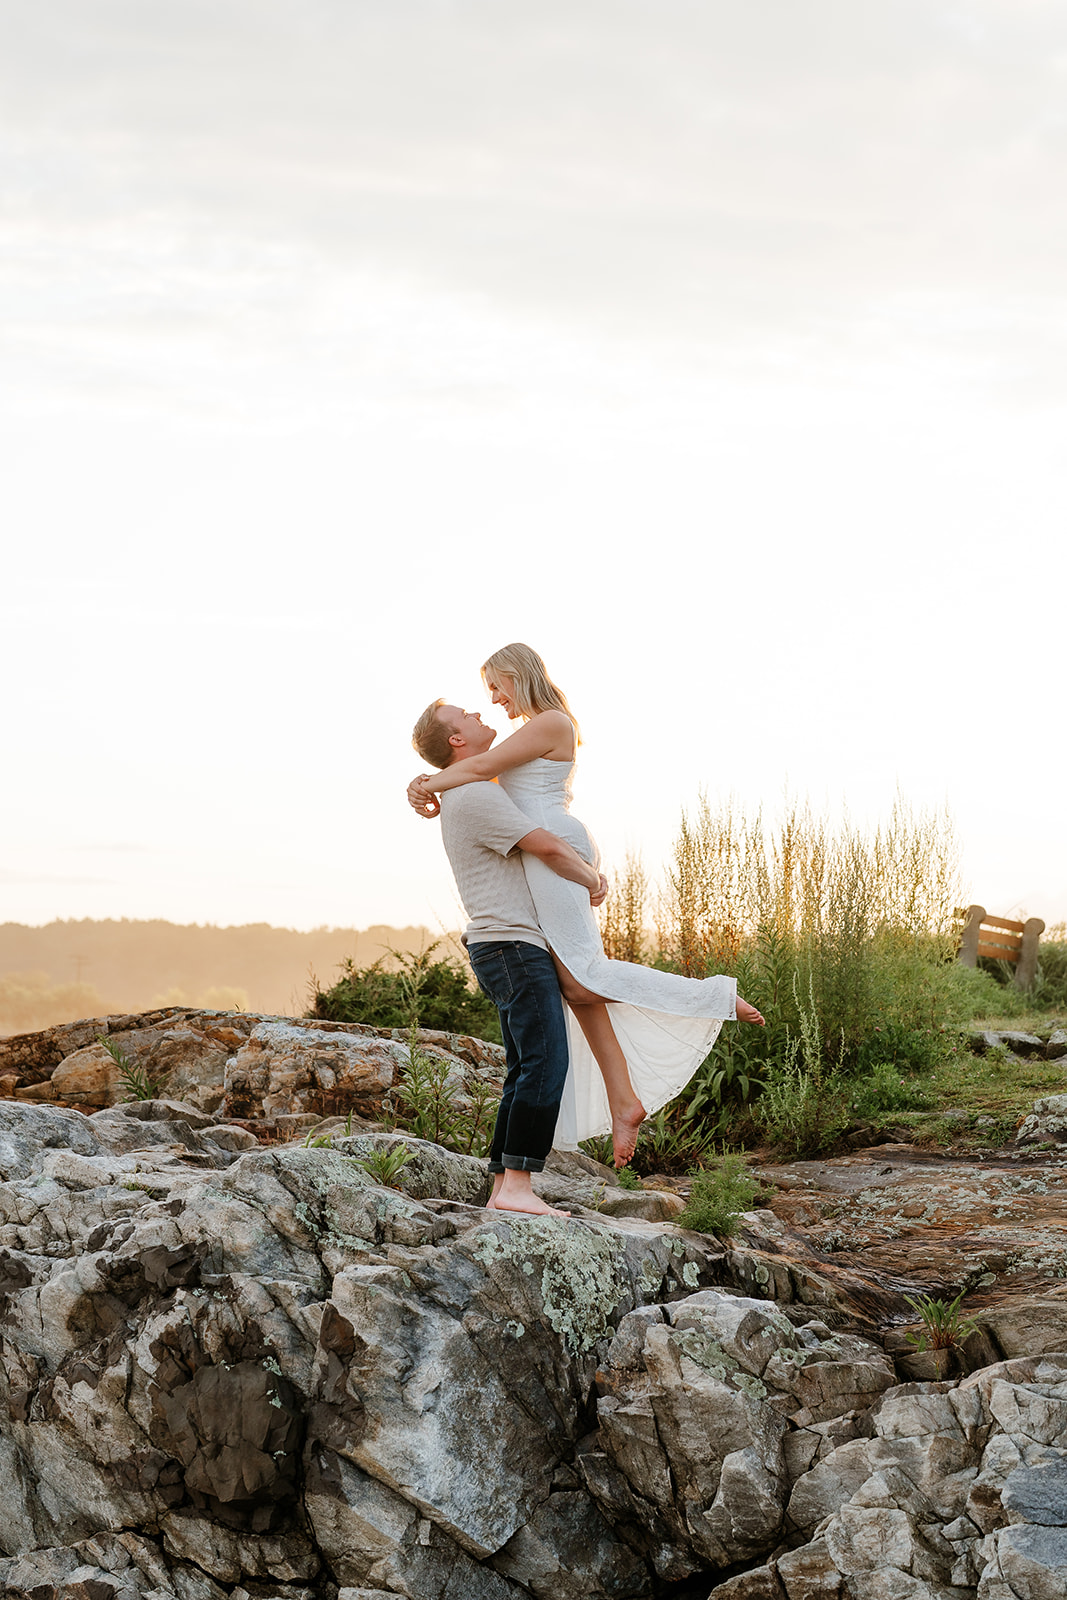 A couple playfully posing on a rocky coastline, with a woman in a white dress extending her arms like wings and a man in jeans behind her, both smiling at their beach engagement session